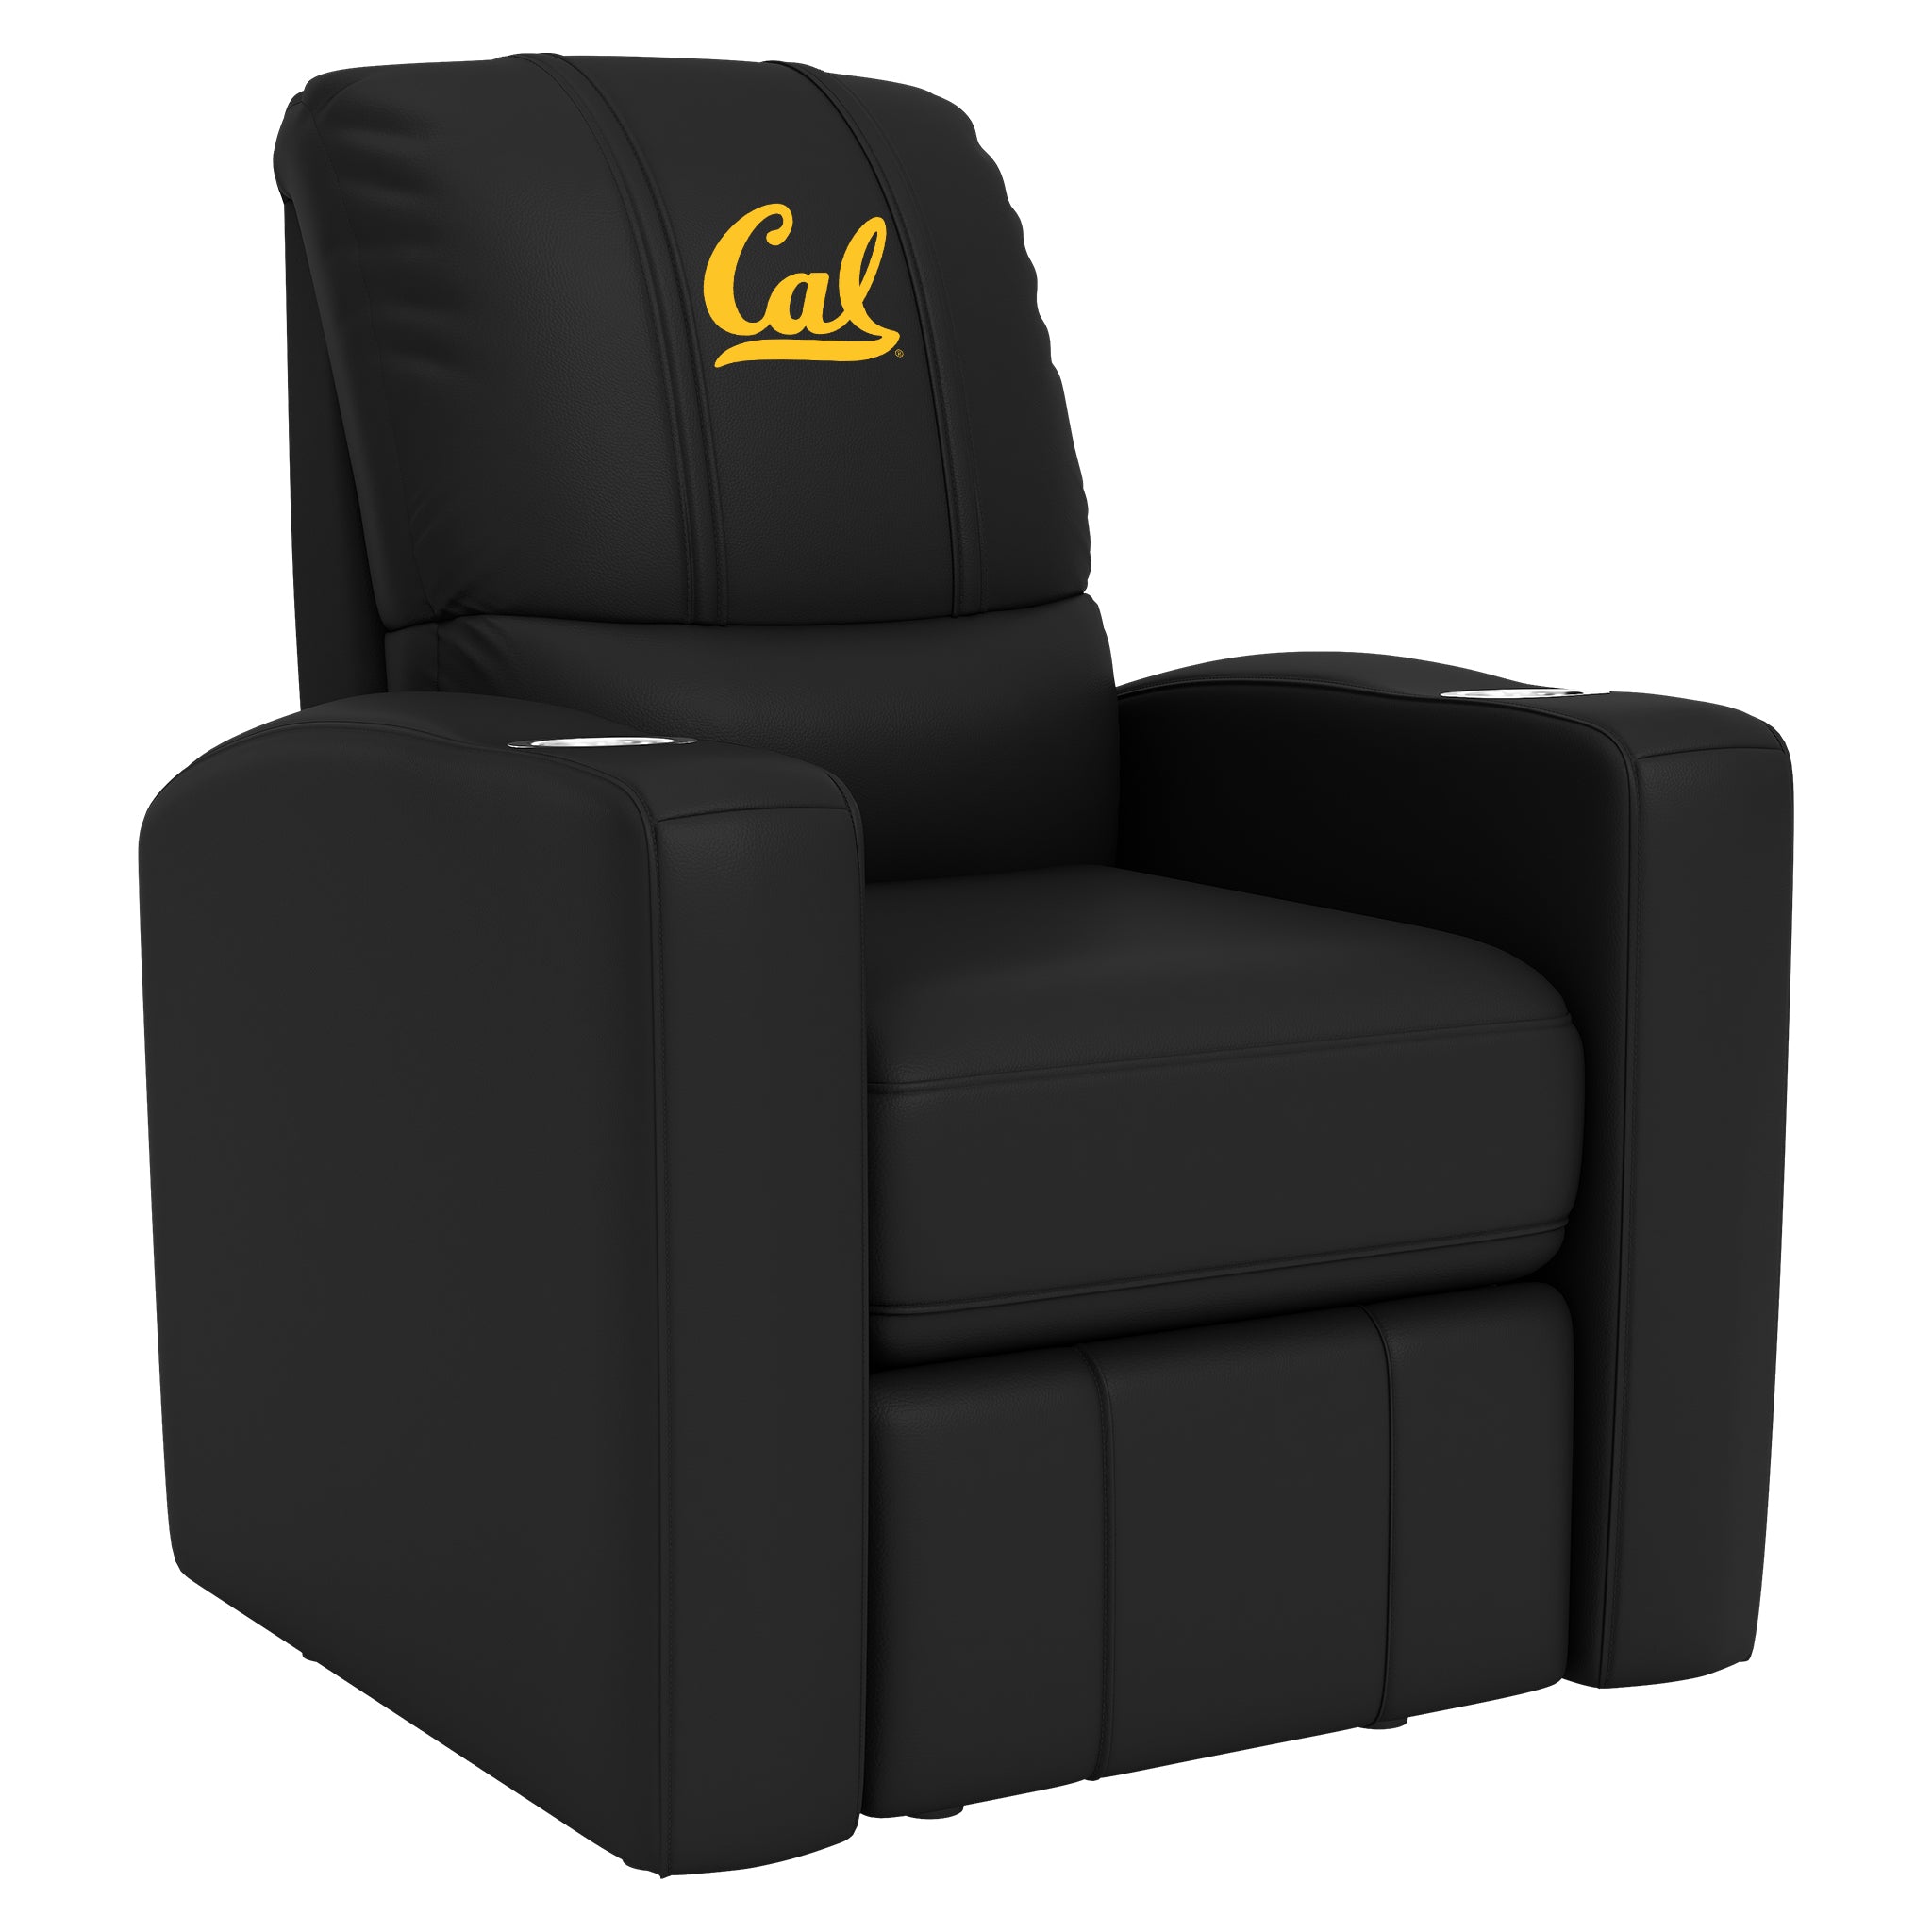 California Golden Bears Stealth Recliner with California Golden Bears Logo